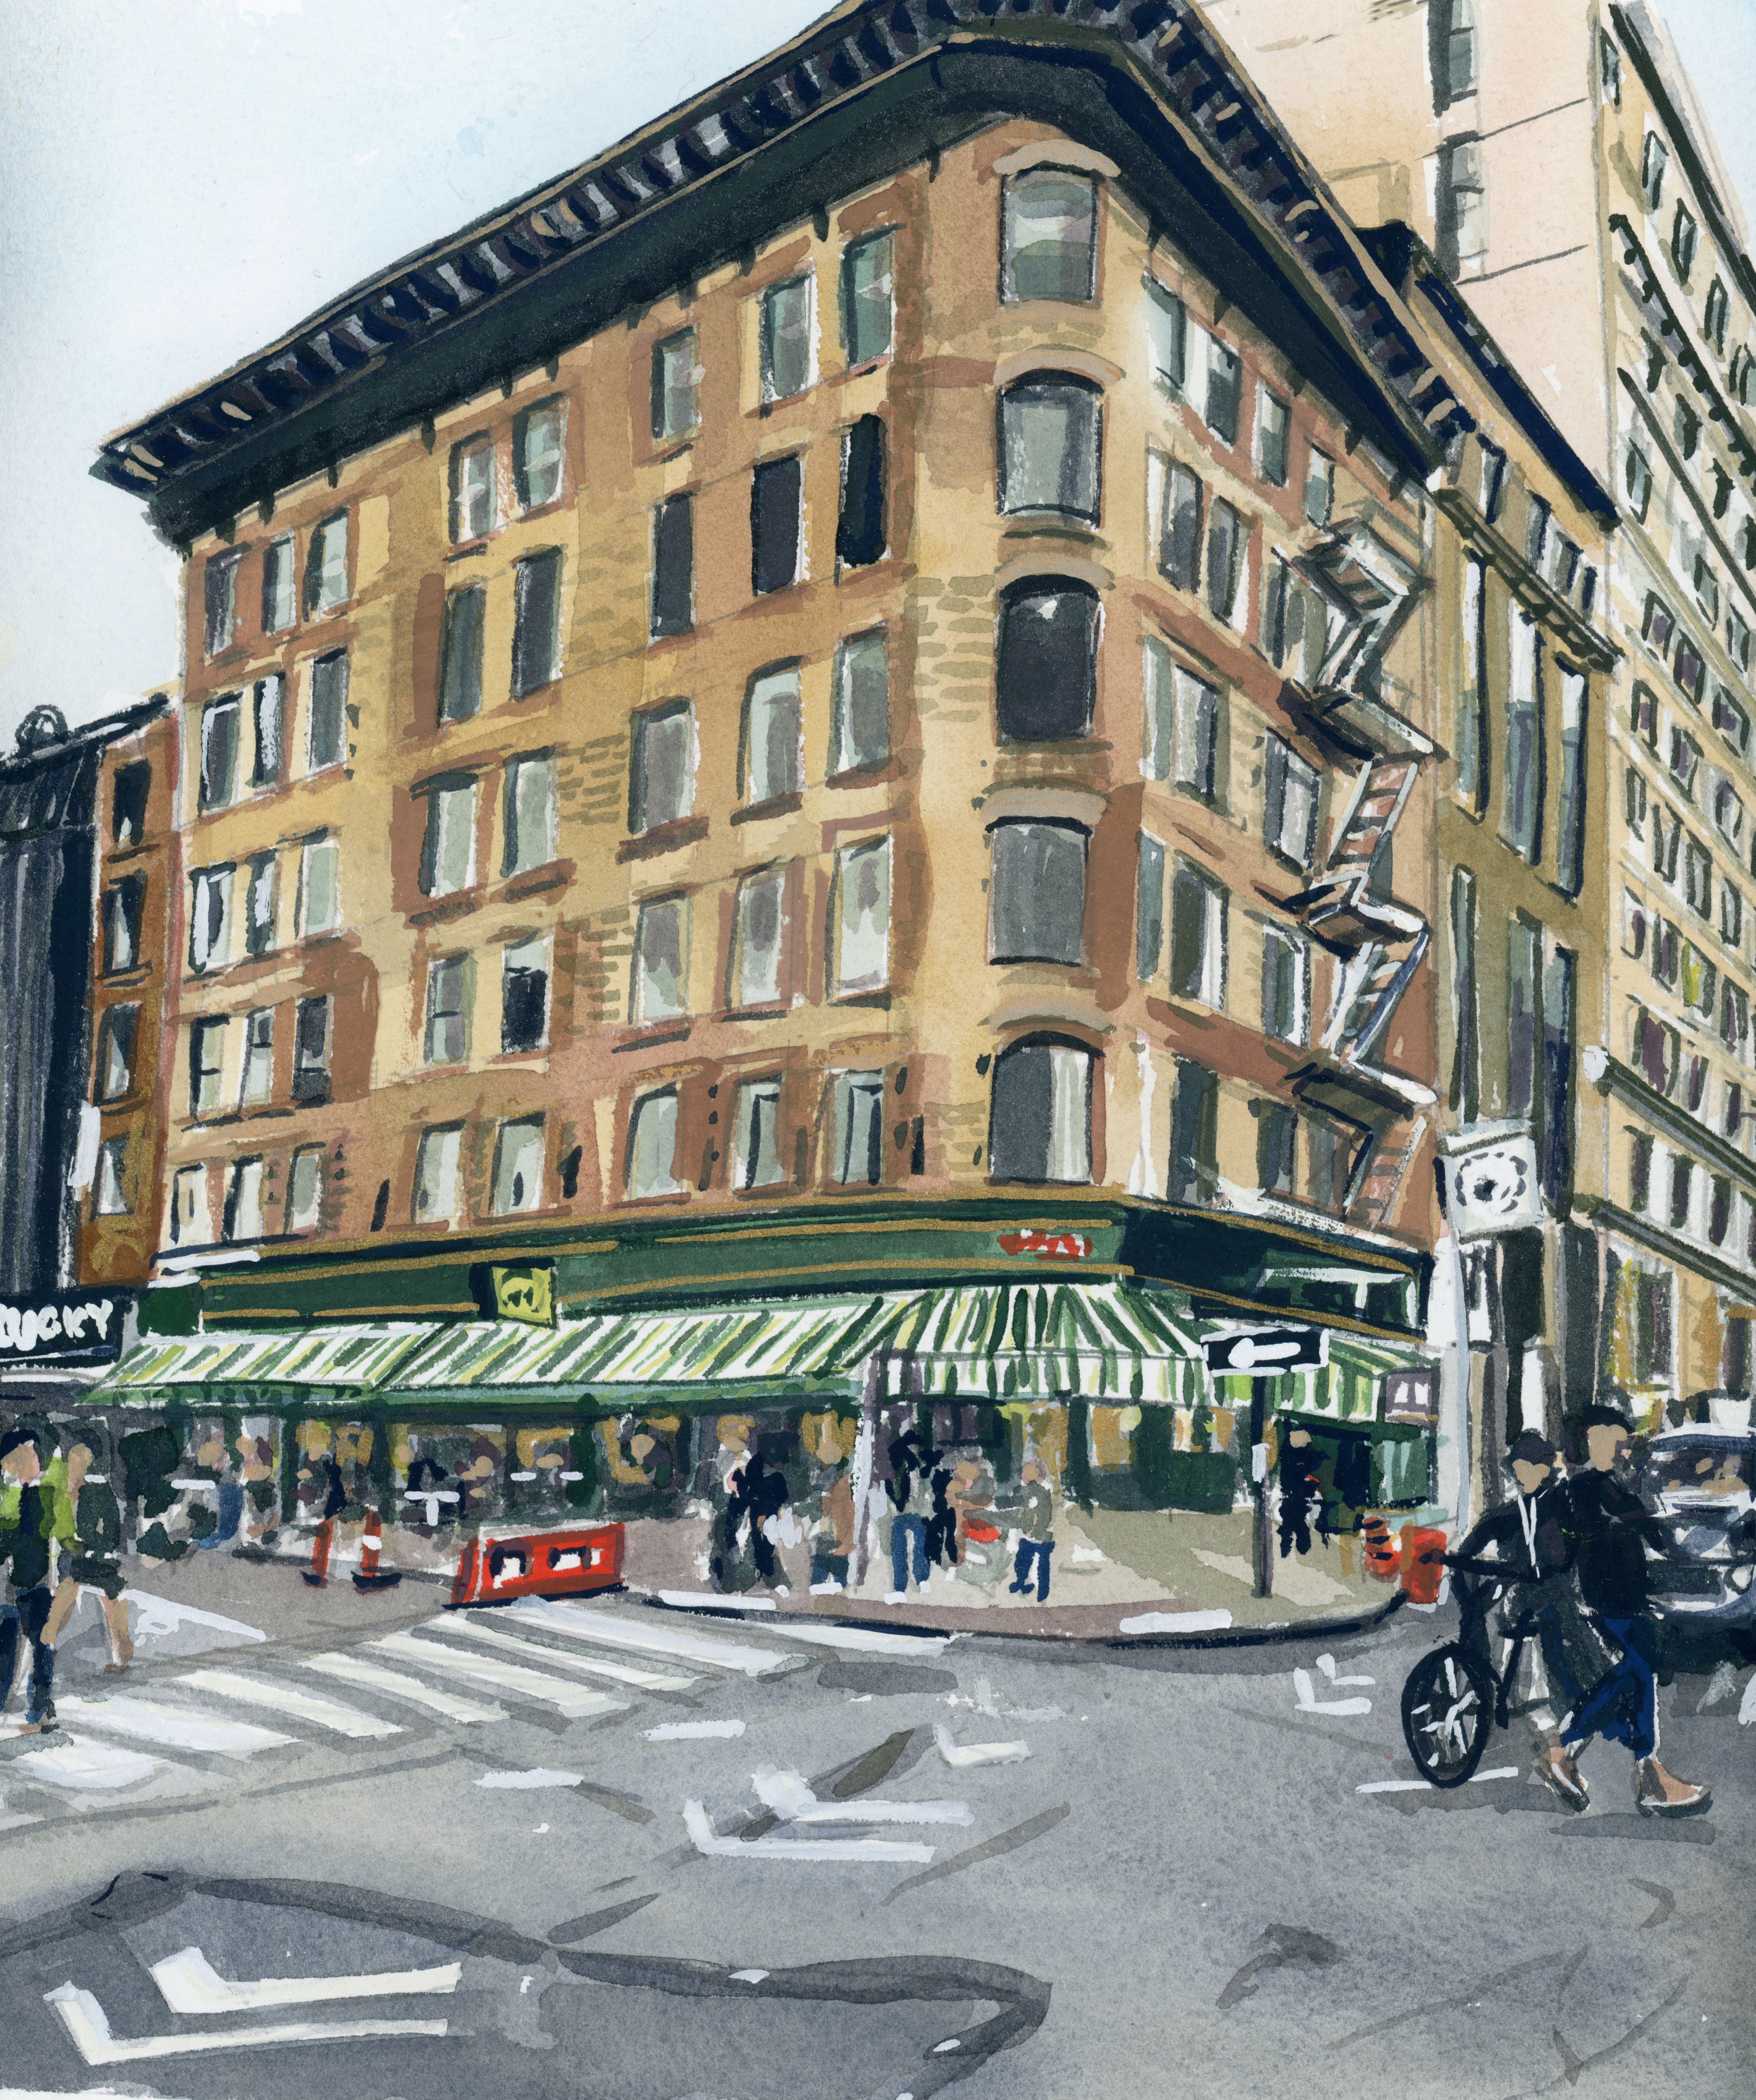 Jack’s Wife Freda original painting by Medjool Studio. Original gouache painting captivating Jack’s Wife Freda restaurant in New York City using neutral colours and textures.